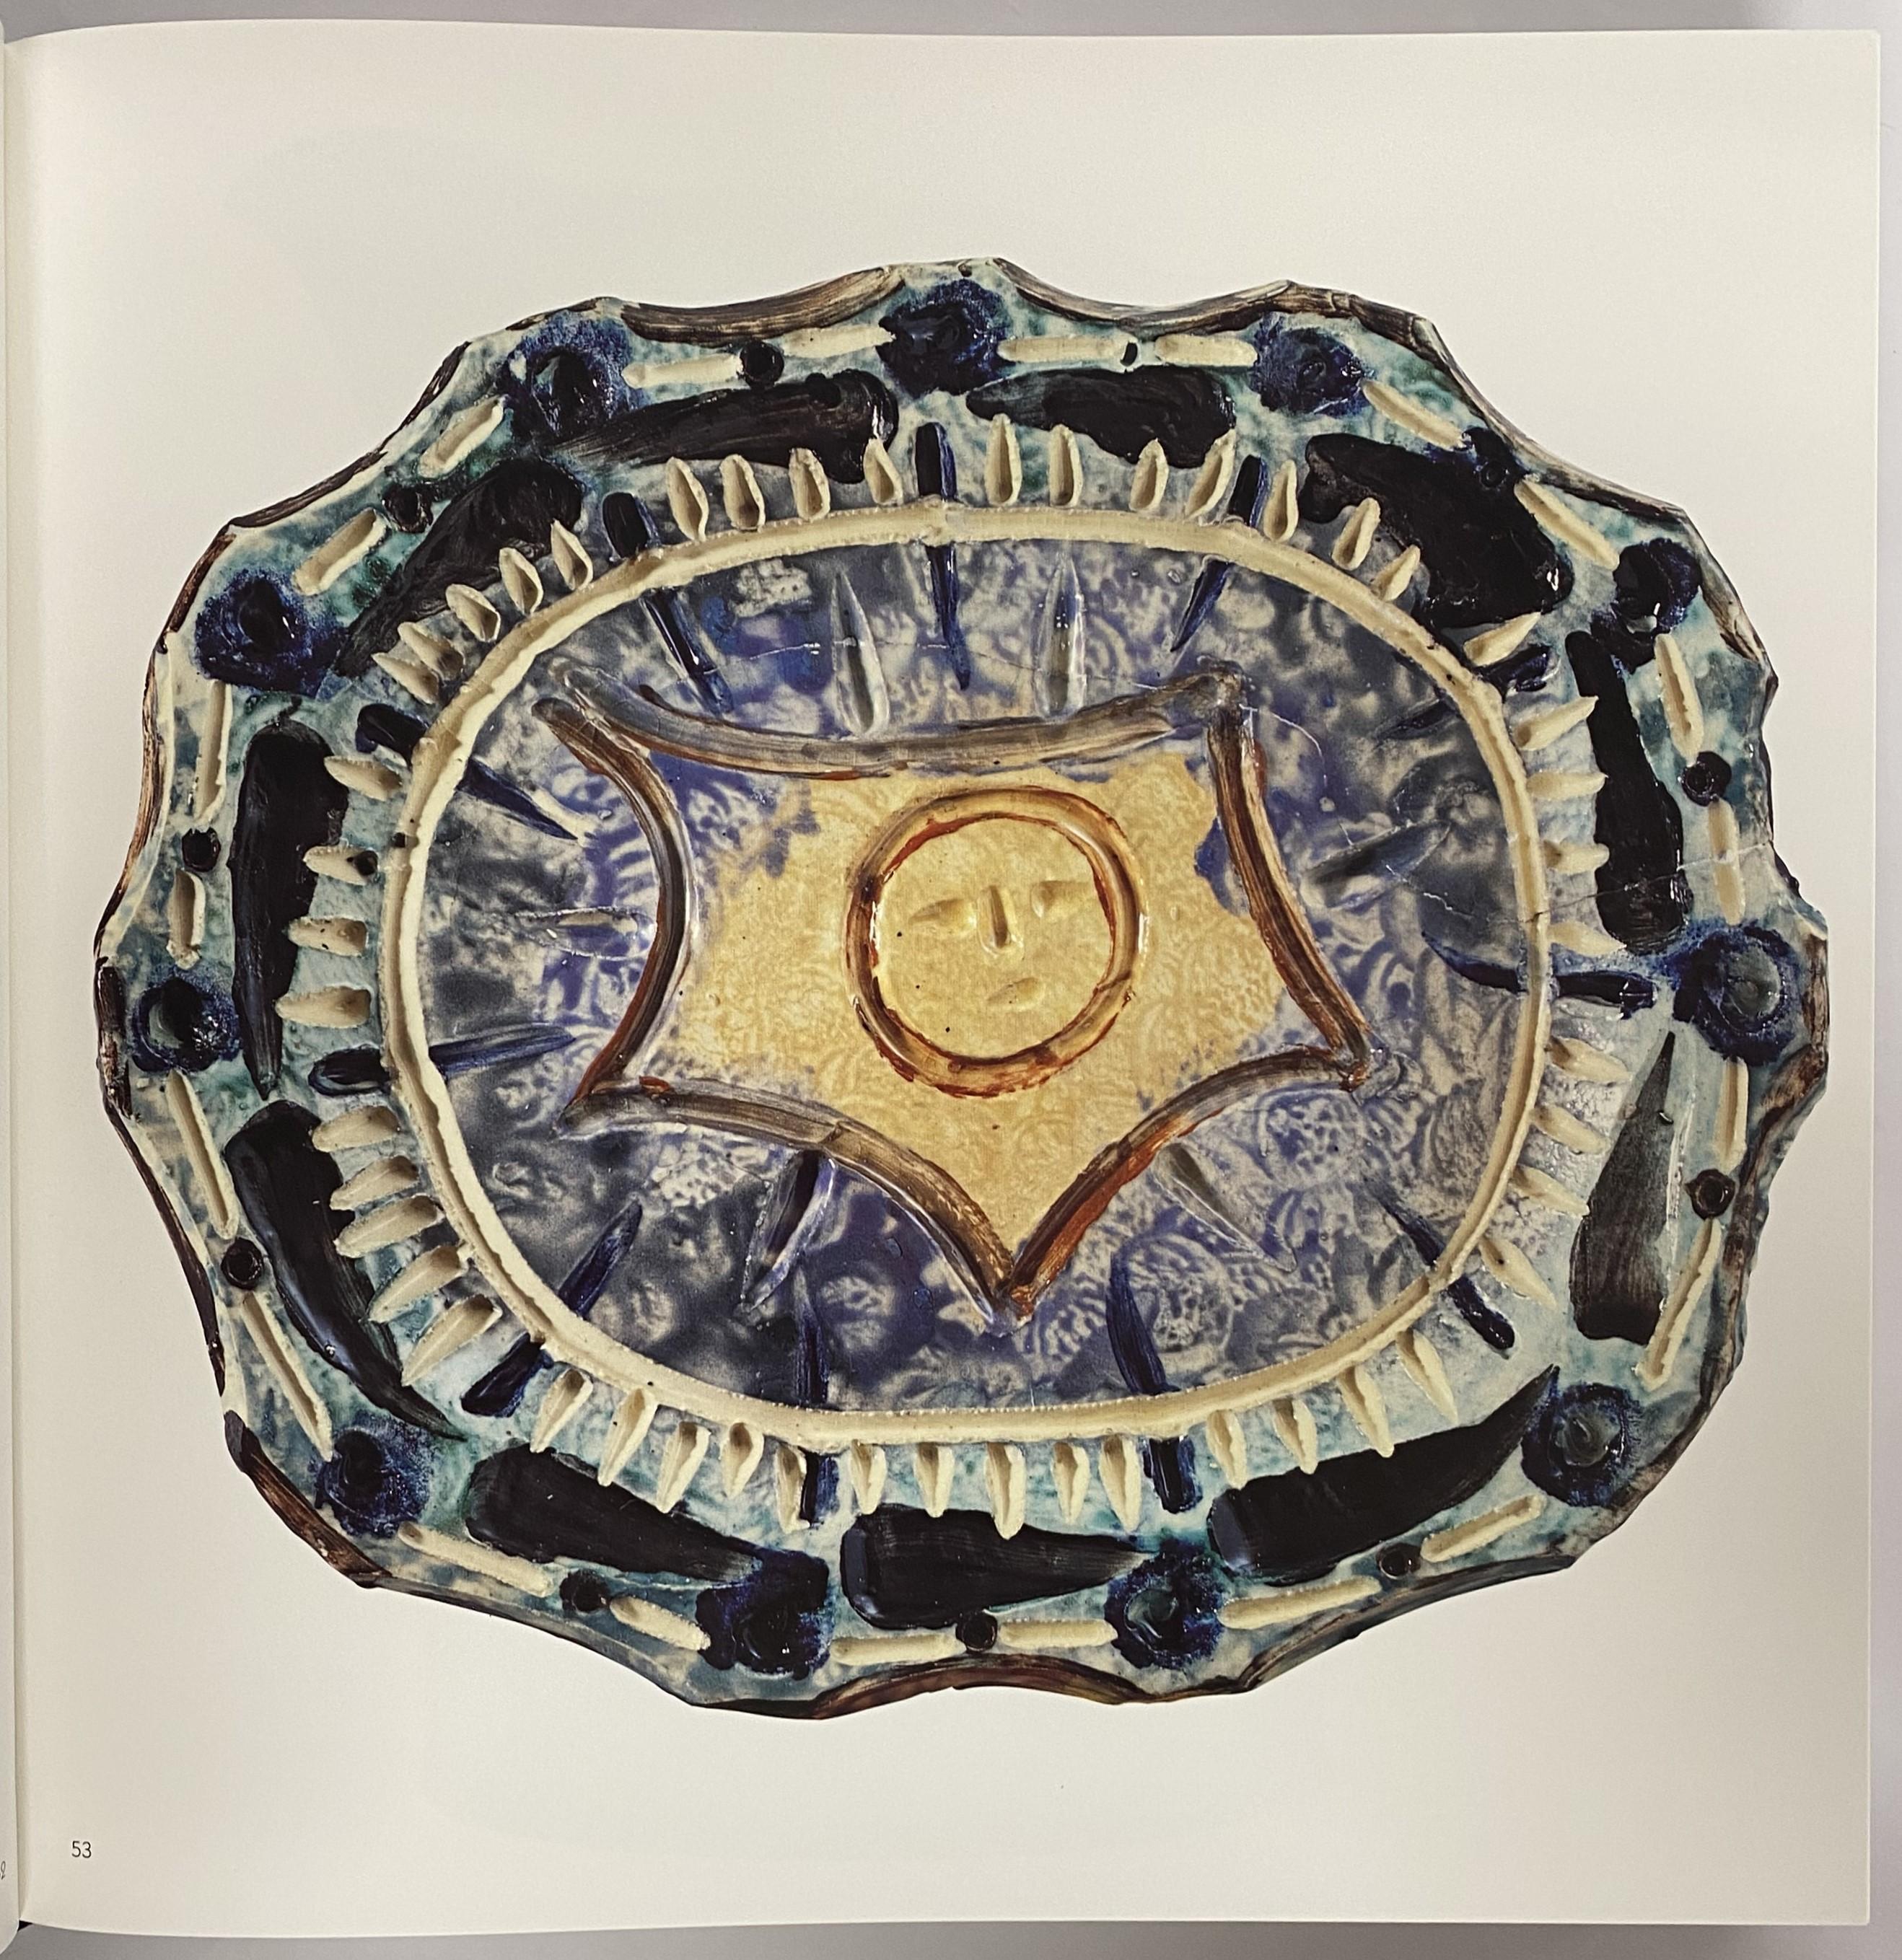 Ceramics by Picasso by Marilyn McCully (Book) In Good Condition For Sale In North Yorkshire, GB